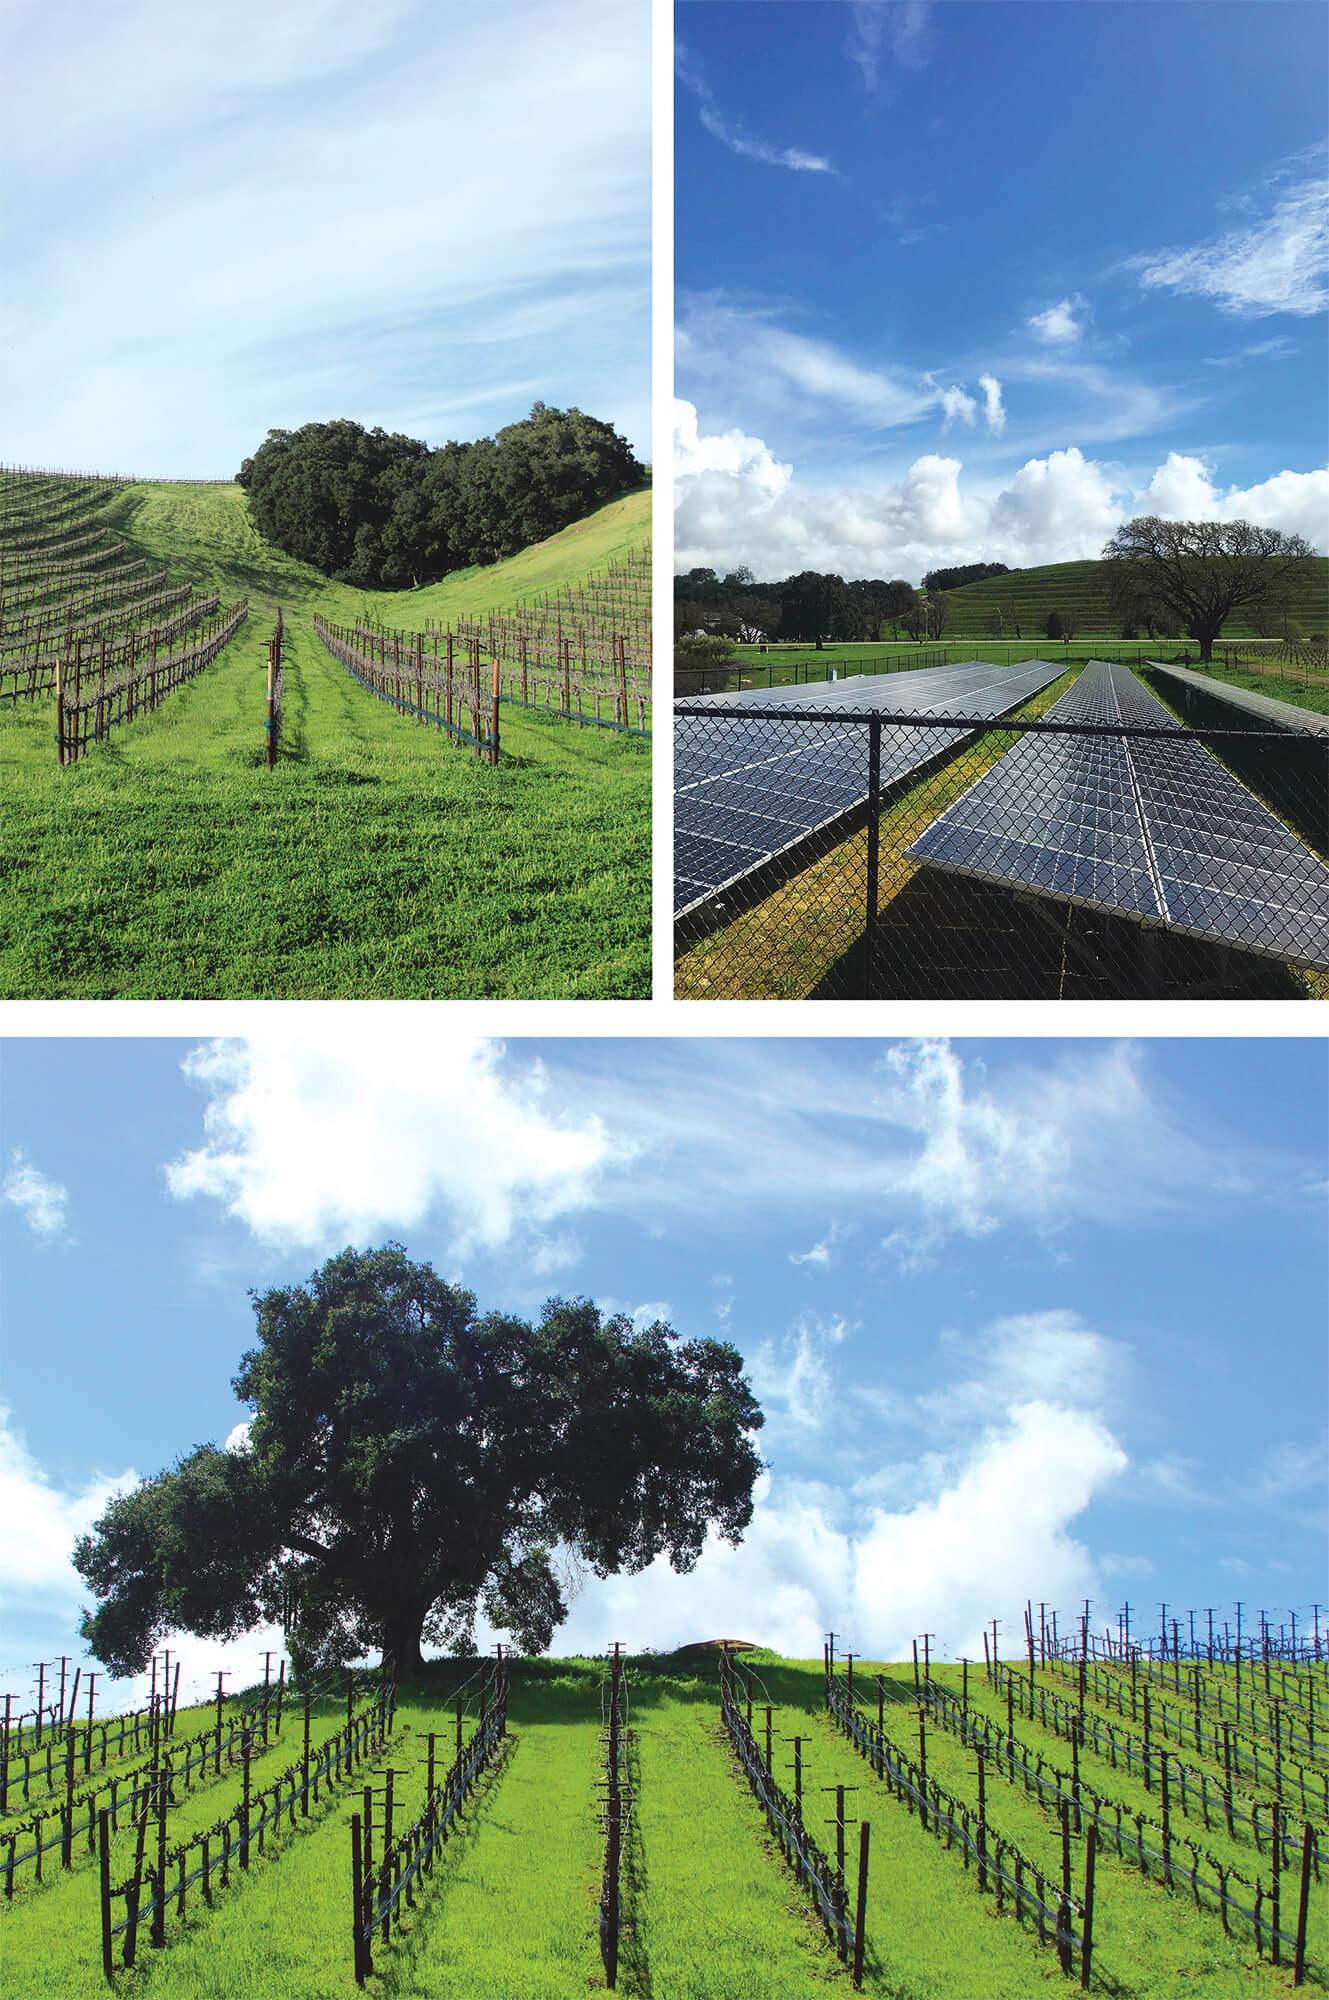 From top: Heart Hill Vineyard with bright green grass, and wispy clouds; Our Solar Panels on a sunny day; an oak tree in front of vine rows in spring